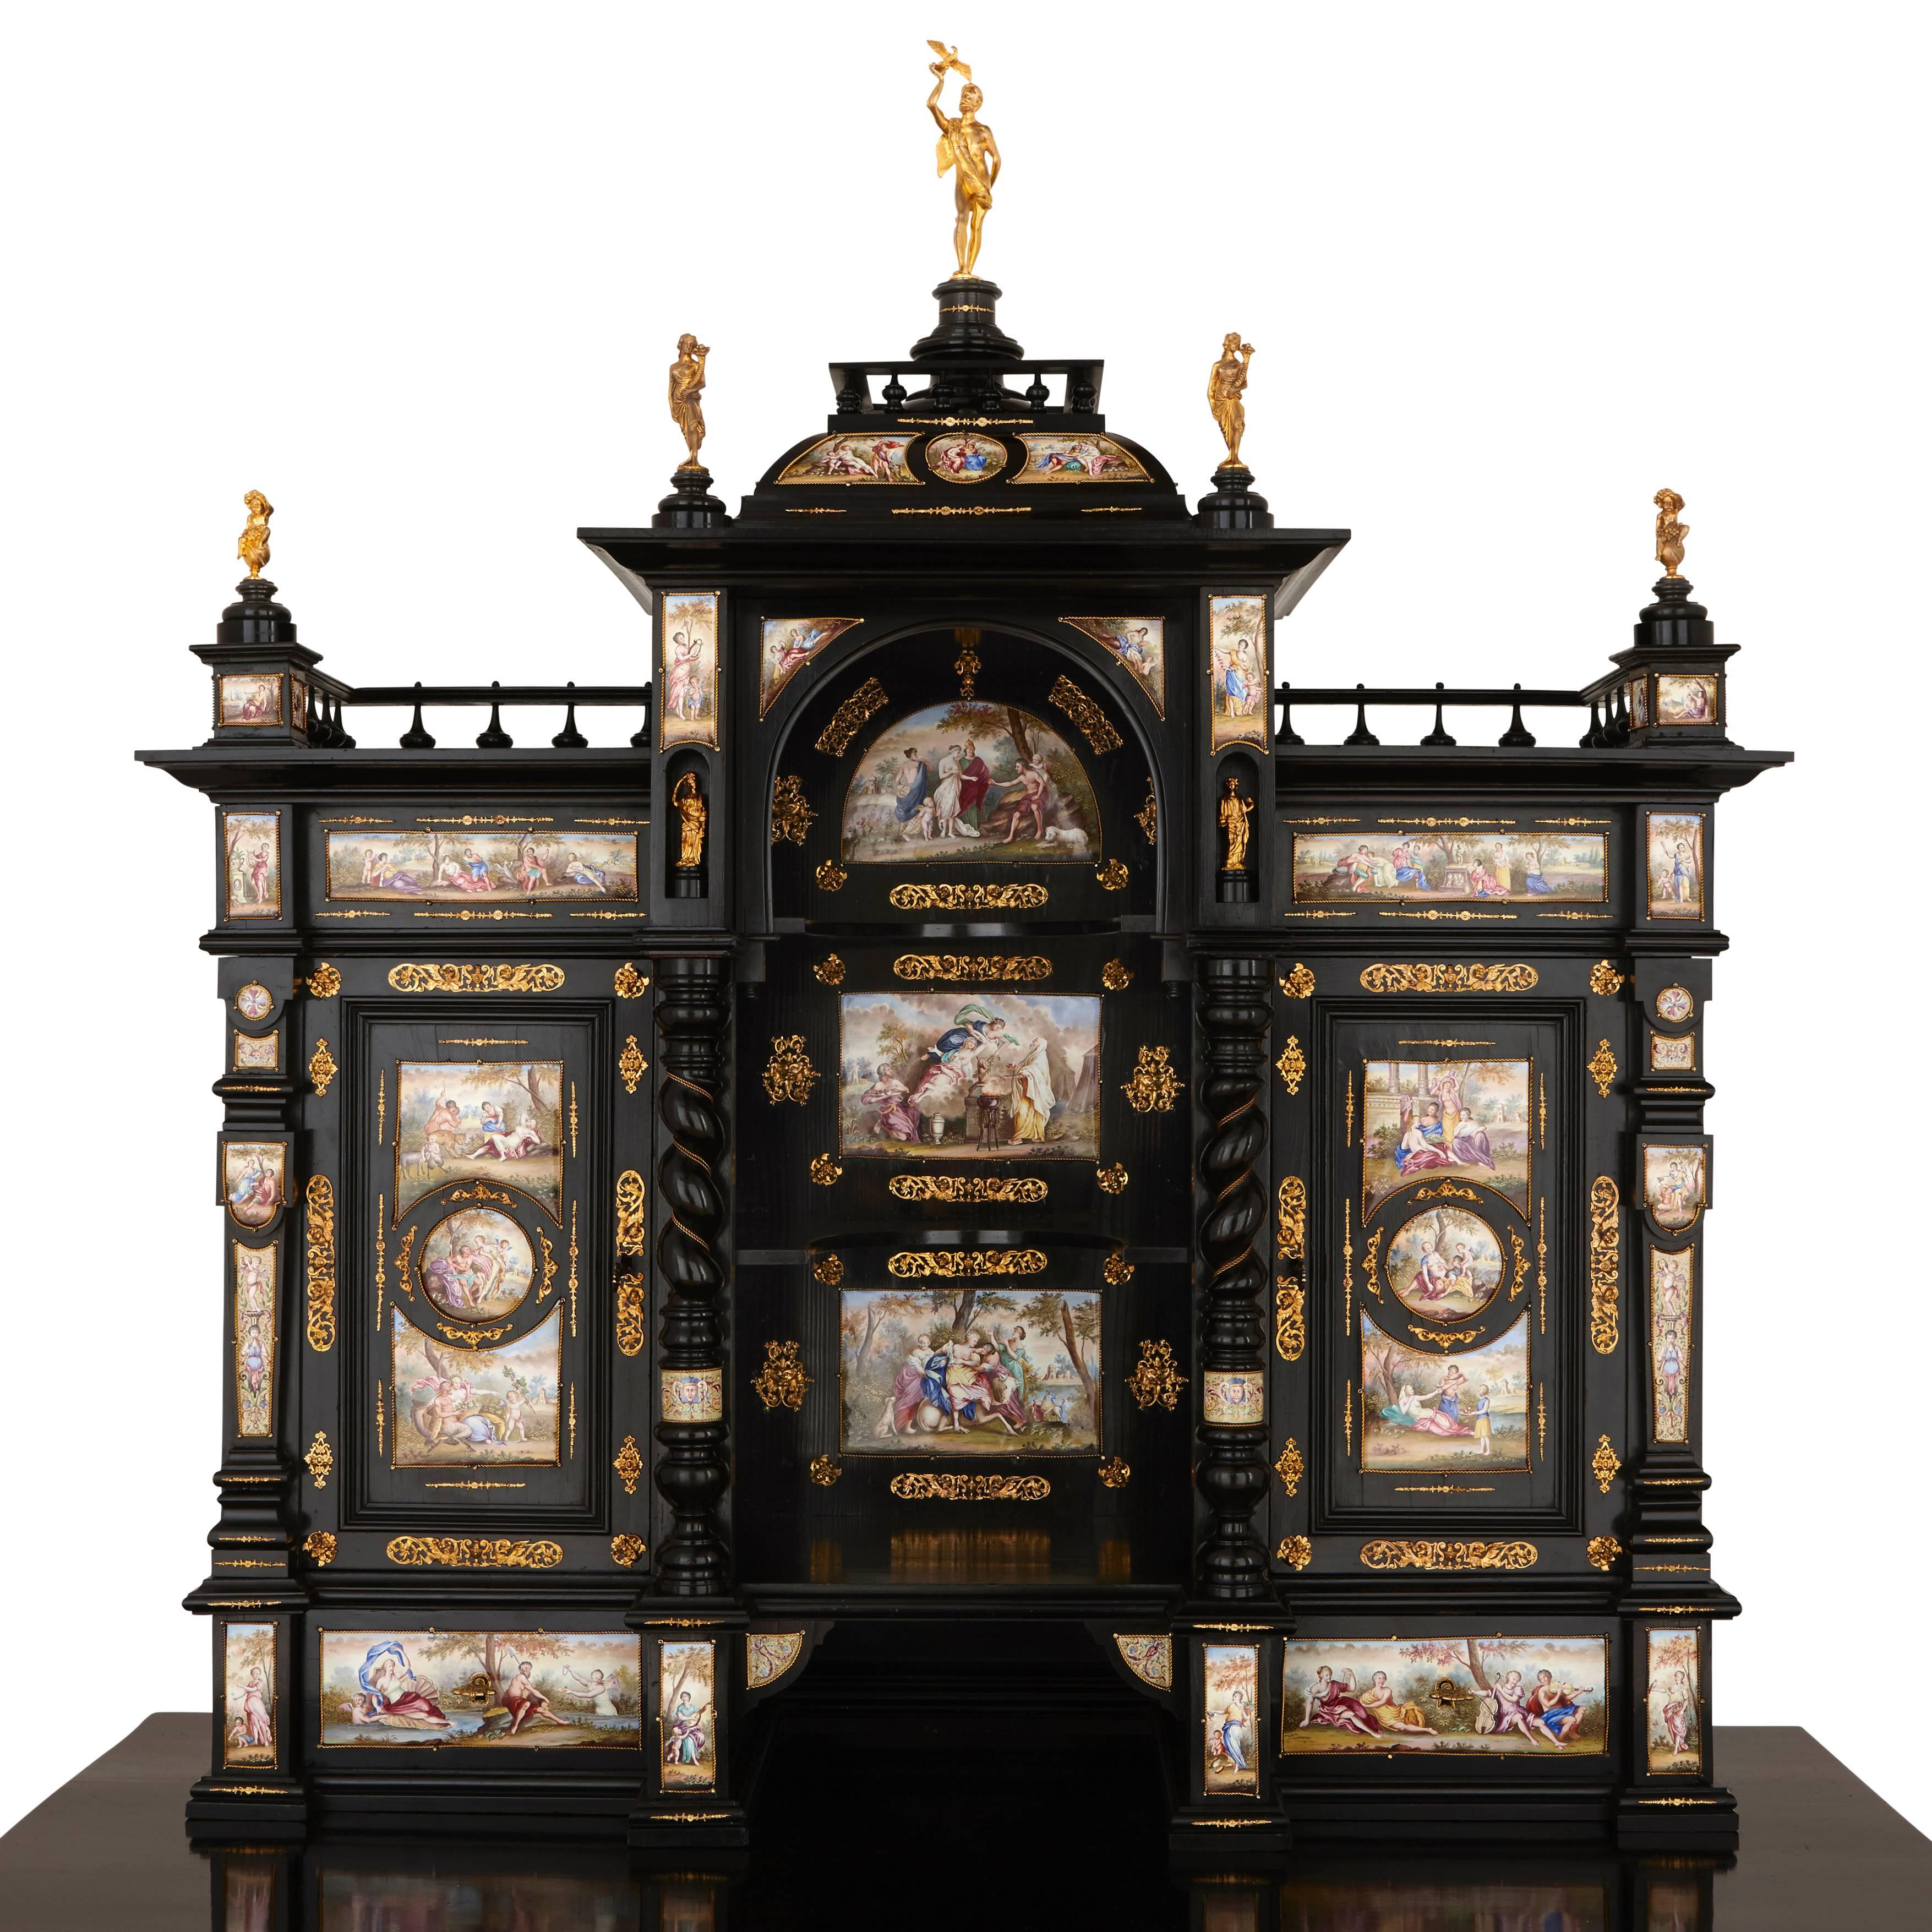 The numerous enamel panels of varying sizes, depicting mythological scenes, the cabinet of rare form, adorned with pilasters, twisted columns and a central dome, mounted with ormolu figures and foliage decoration, opening with two lower drawers and